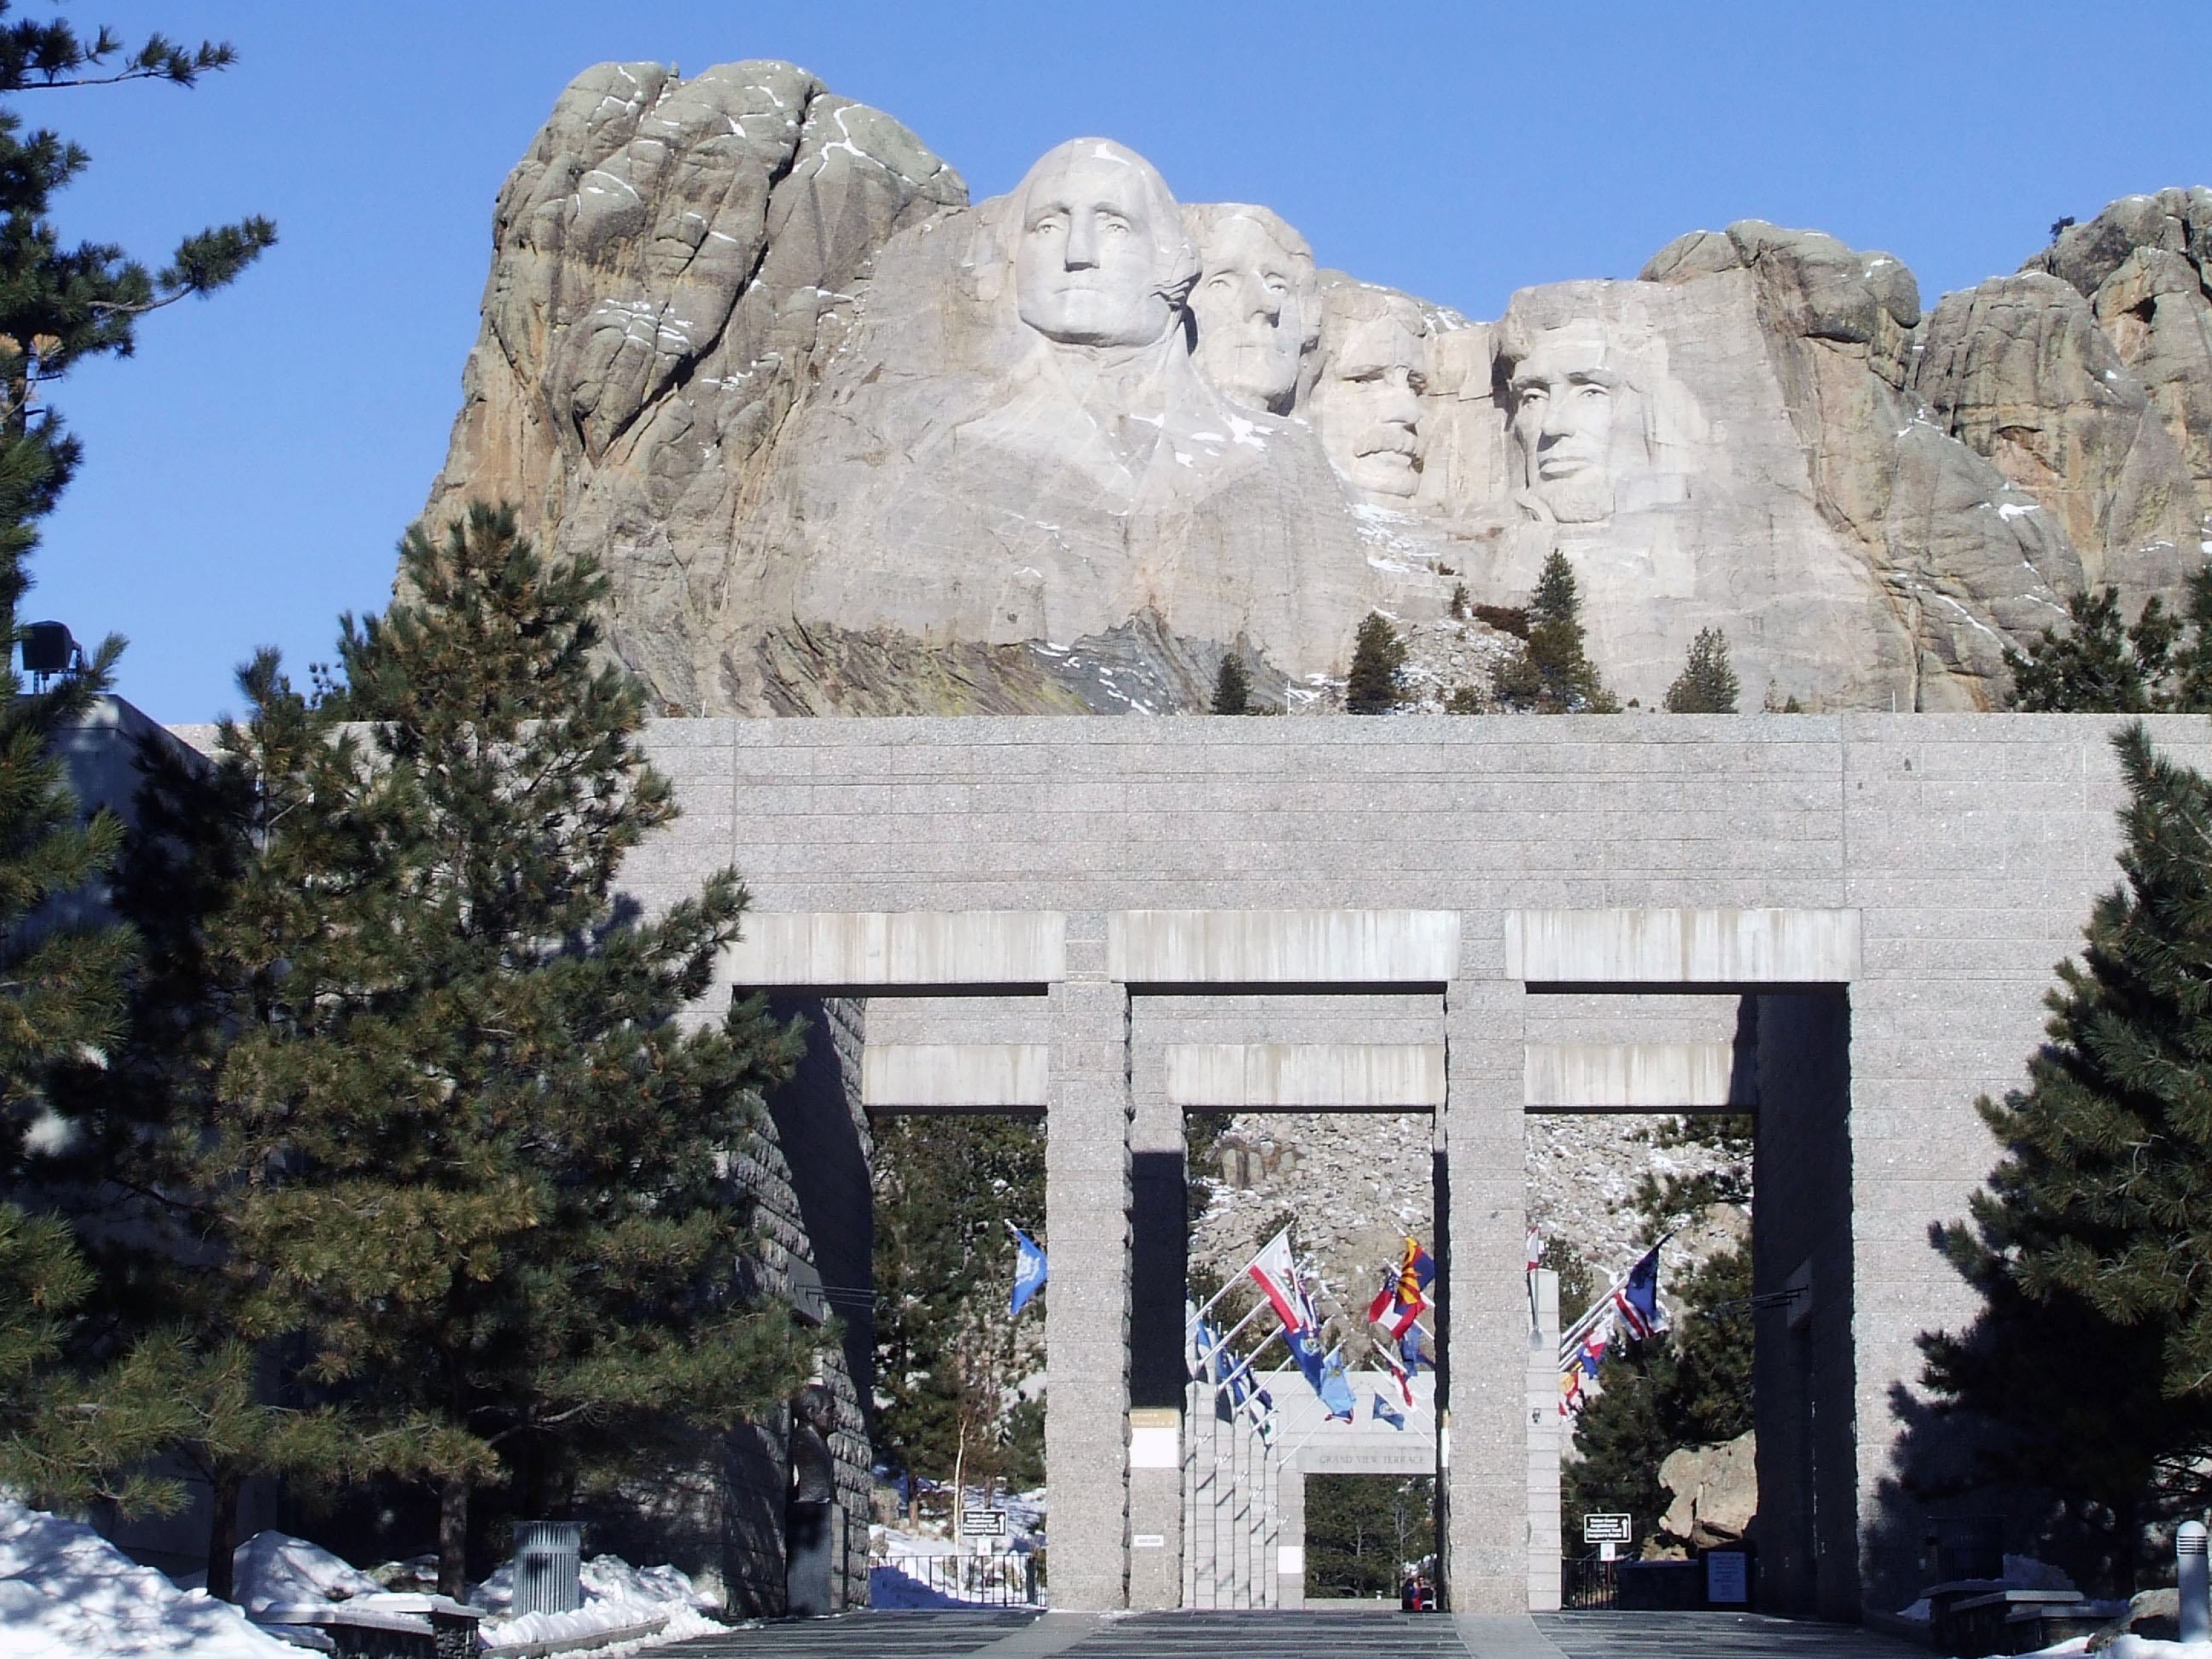 The avenue of flags at Mount Rushmore.